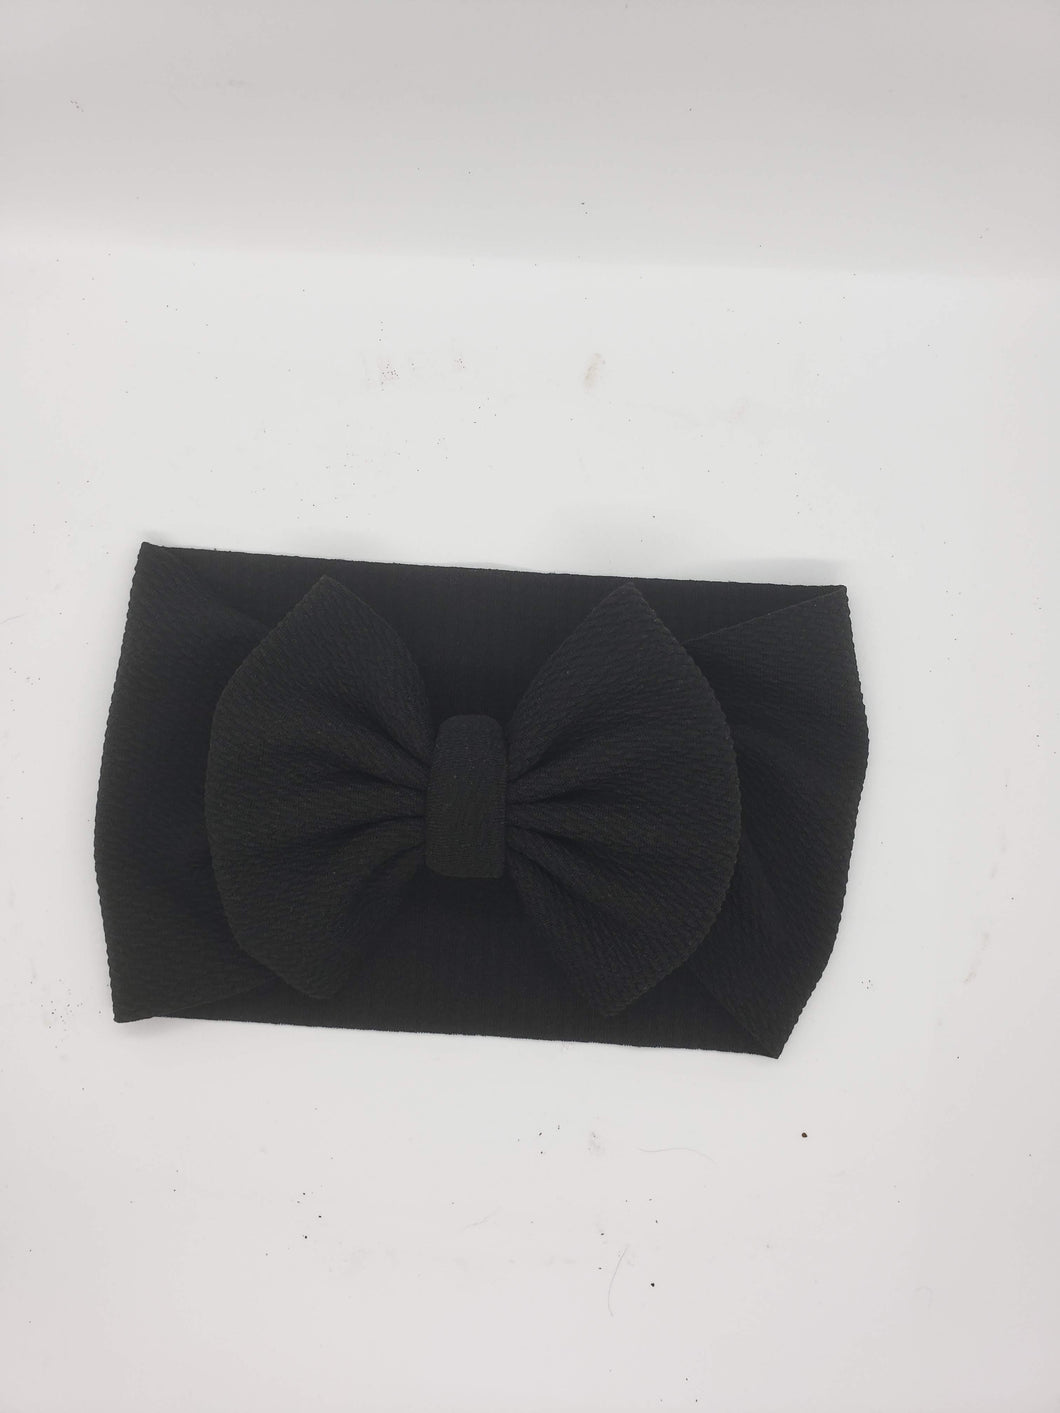 Solid Black Bows - All Styles and Sizes